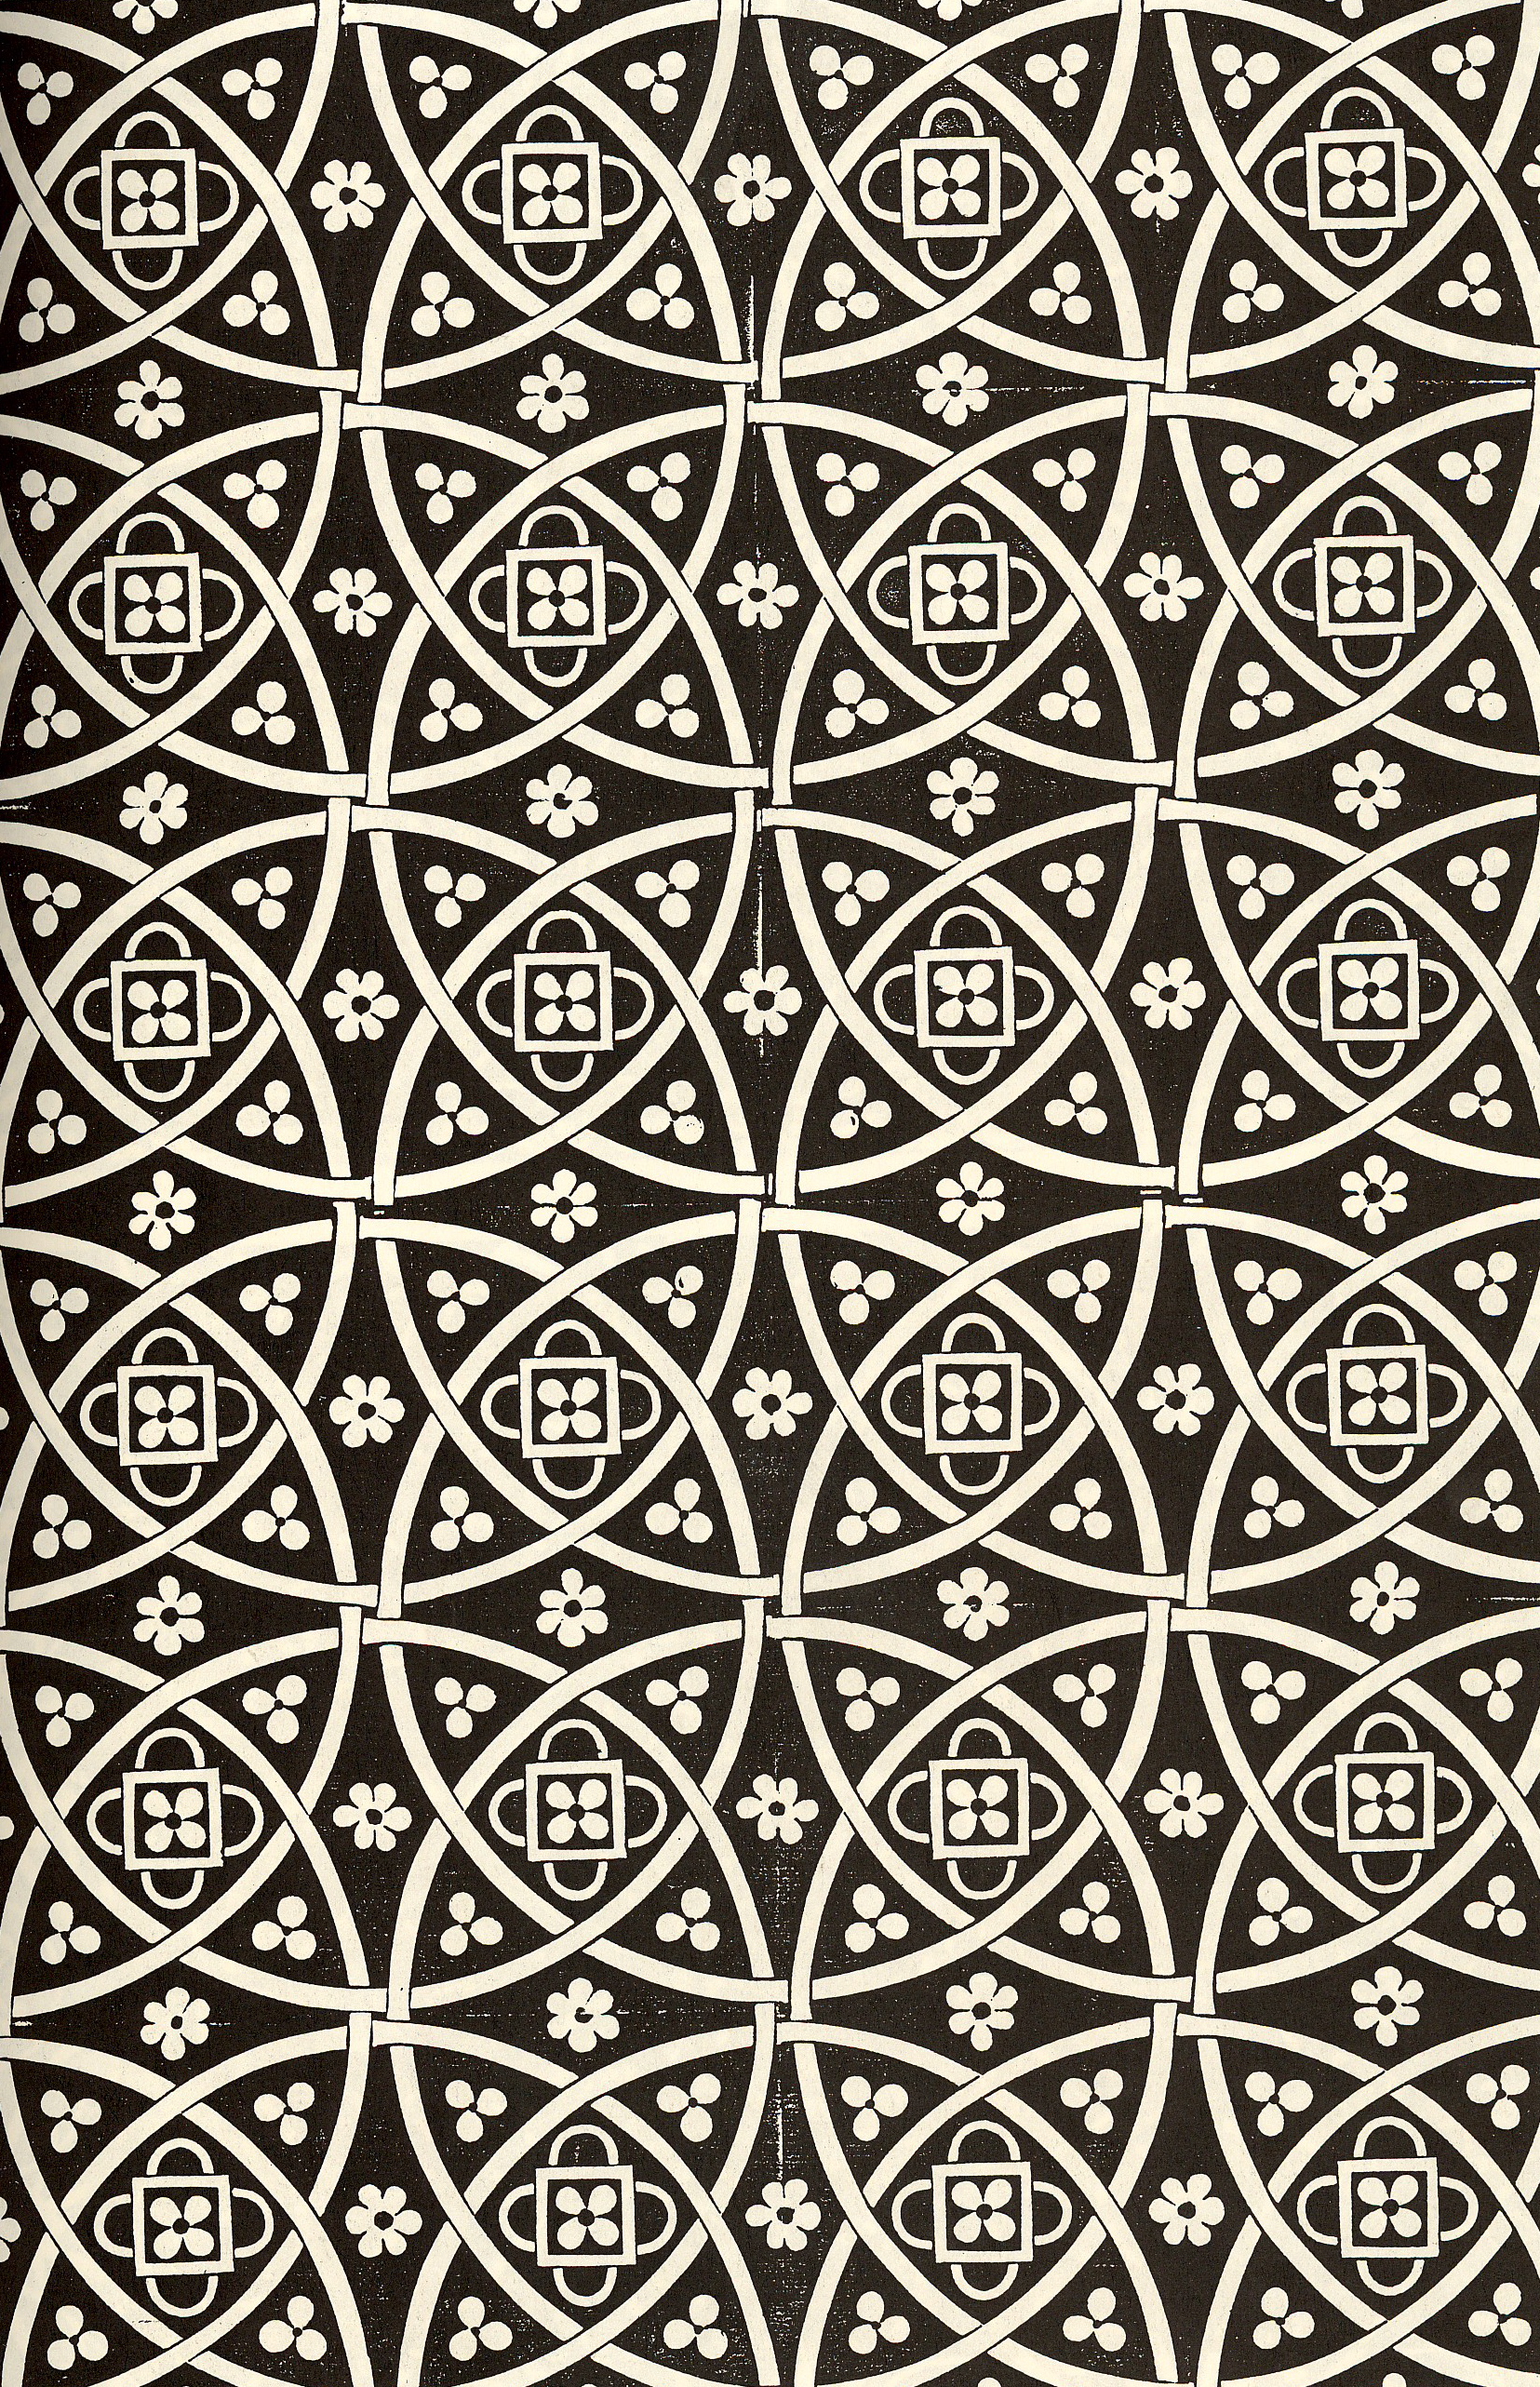 Notebook Baked Earth A Gallery Of Decorative Tile Pattern